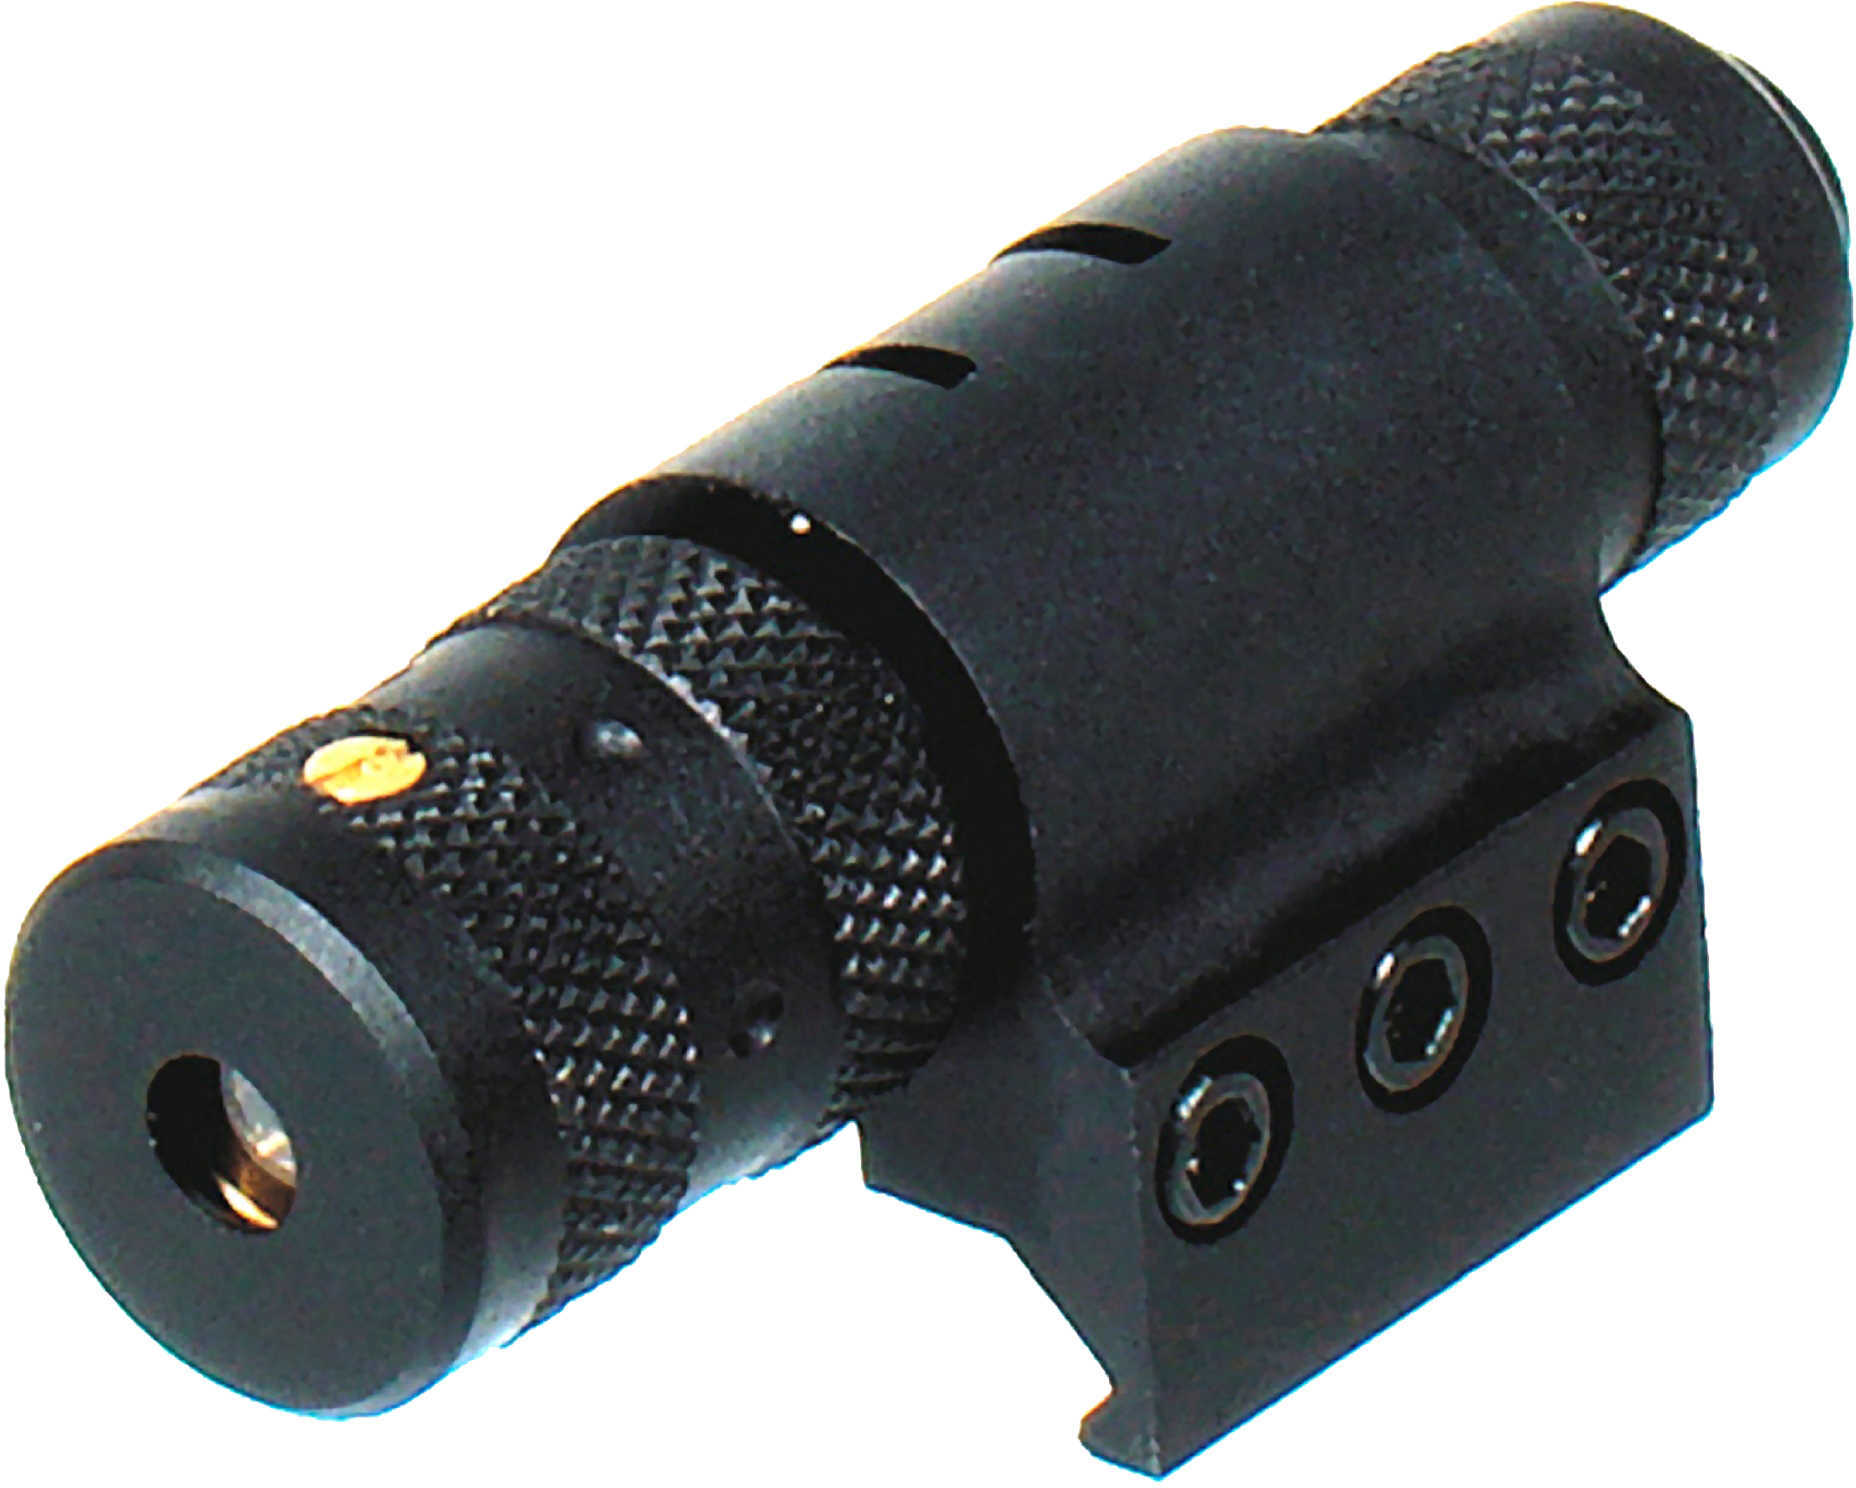 UTG Leapers Combat Tactical W/E Adjustable Red Laser with Rings Md: SCPLS268